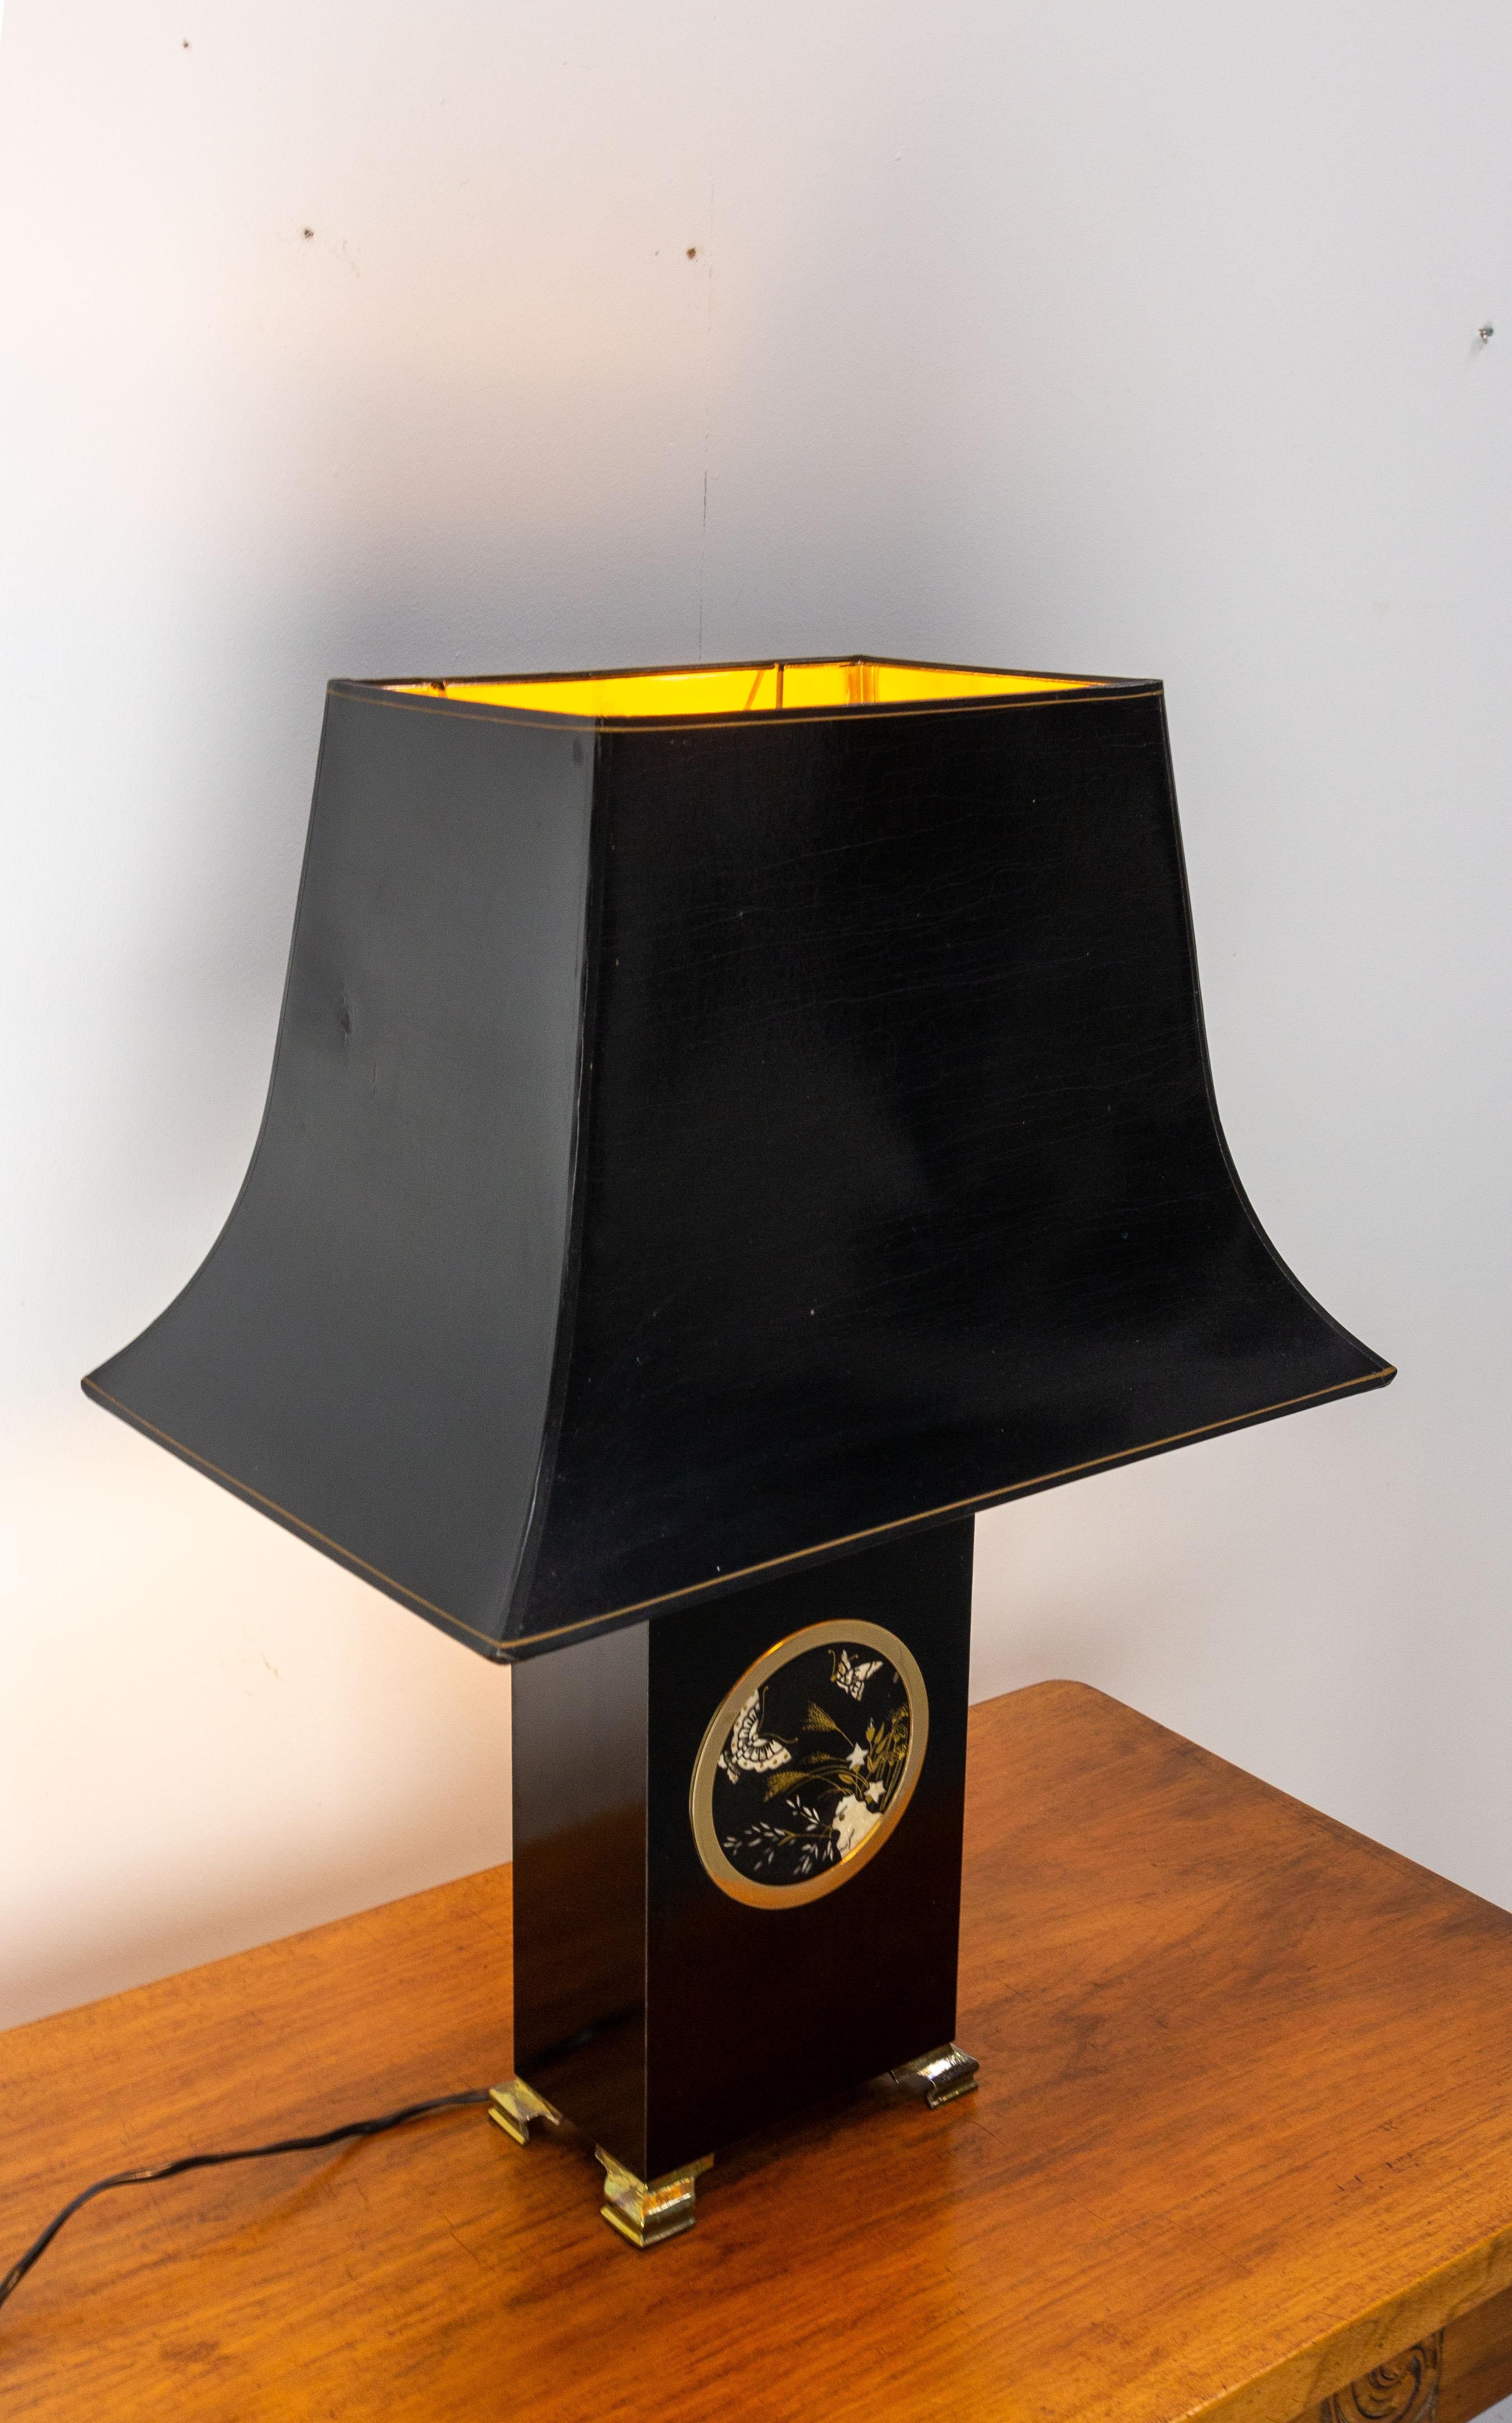 Mid-Century Modern French Mid-Century Table Lamp, Black with a Decof of Butterflies, c. 1970 For Sale